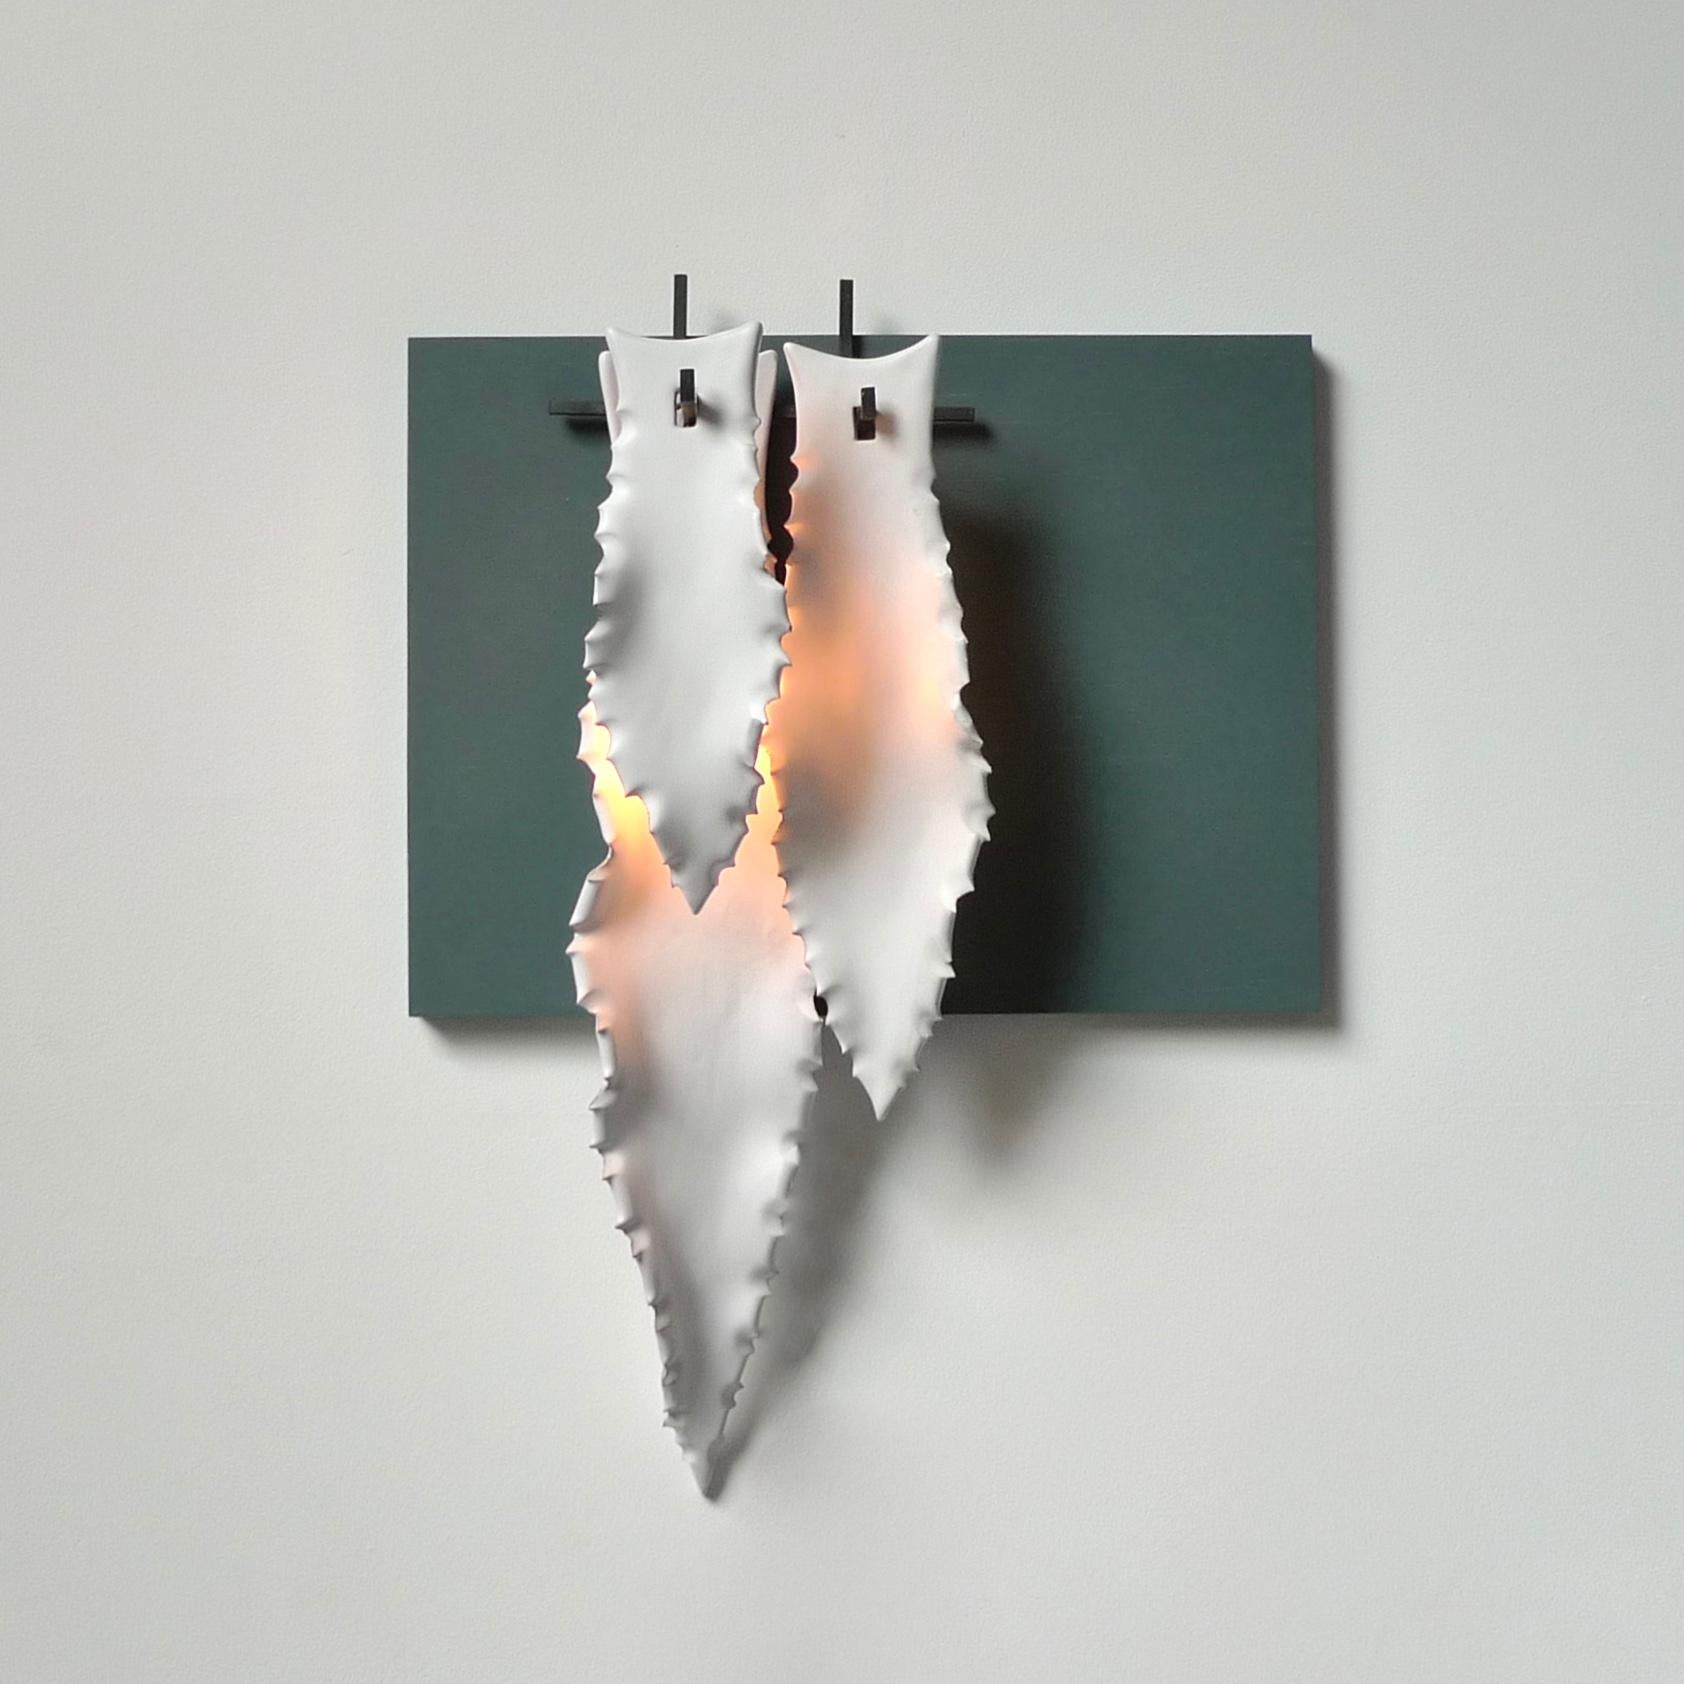 3 agave leafs wall light by Sander Bottinga
Dimensions: W 20 x D 13 x H 54 cm
Materials: Ceramic, forged iron, leather

Handmade matte white Agave leaves in ceramics from the famous ceramic village Grottaglie / Puglia in the south of